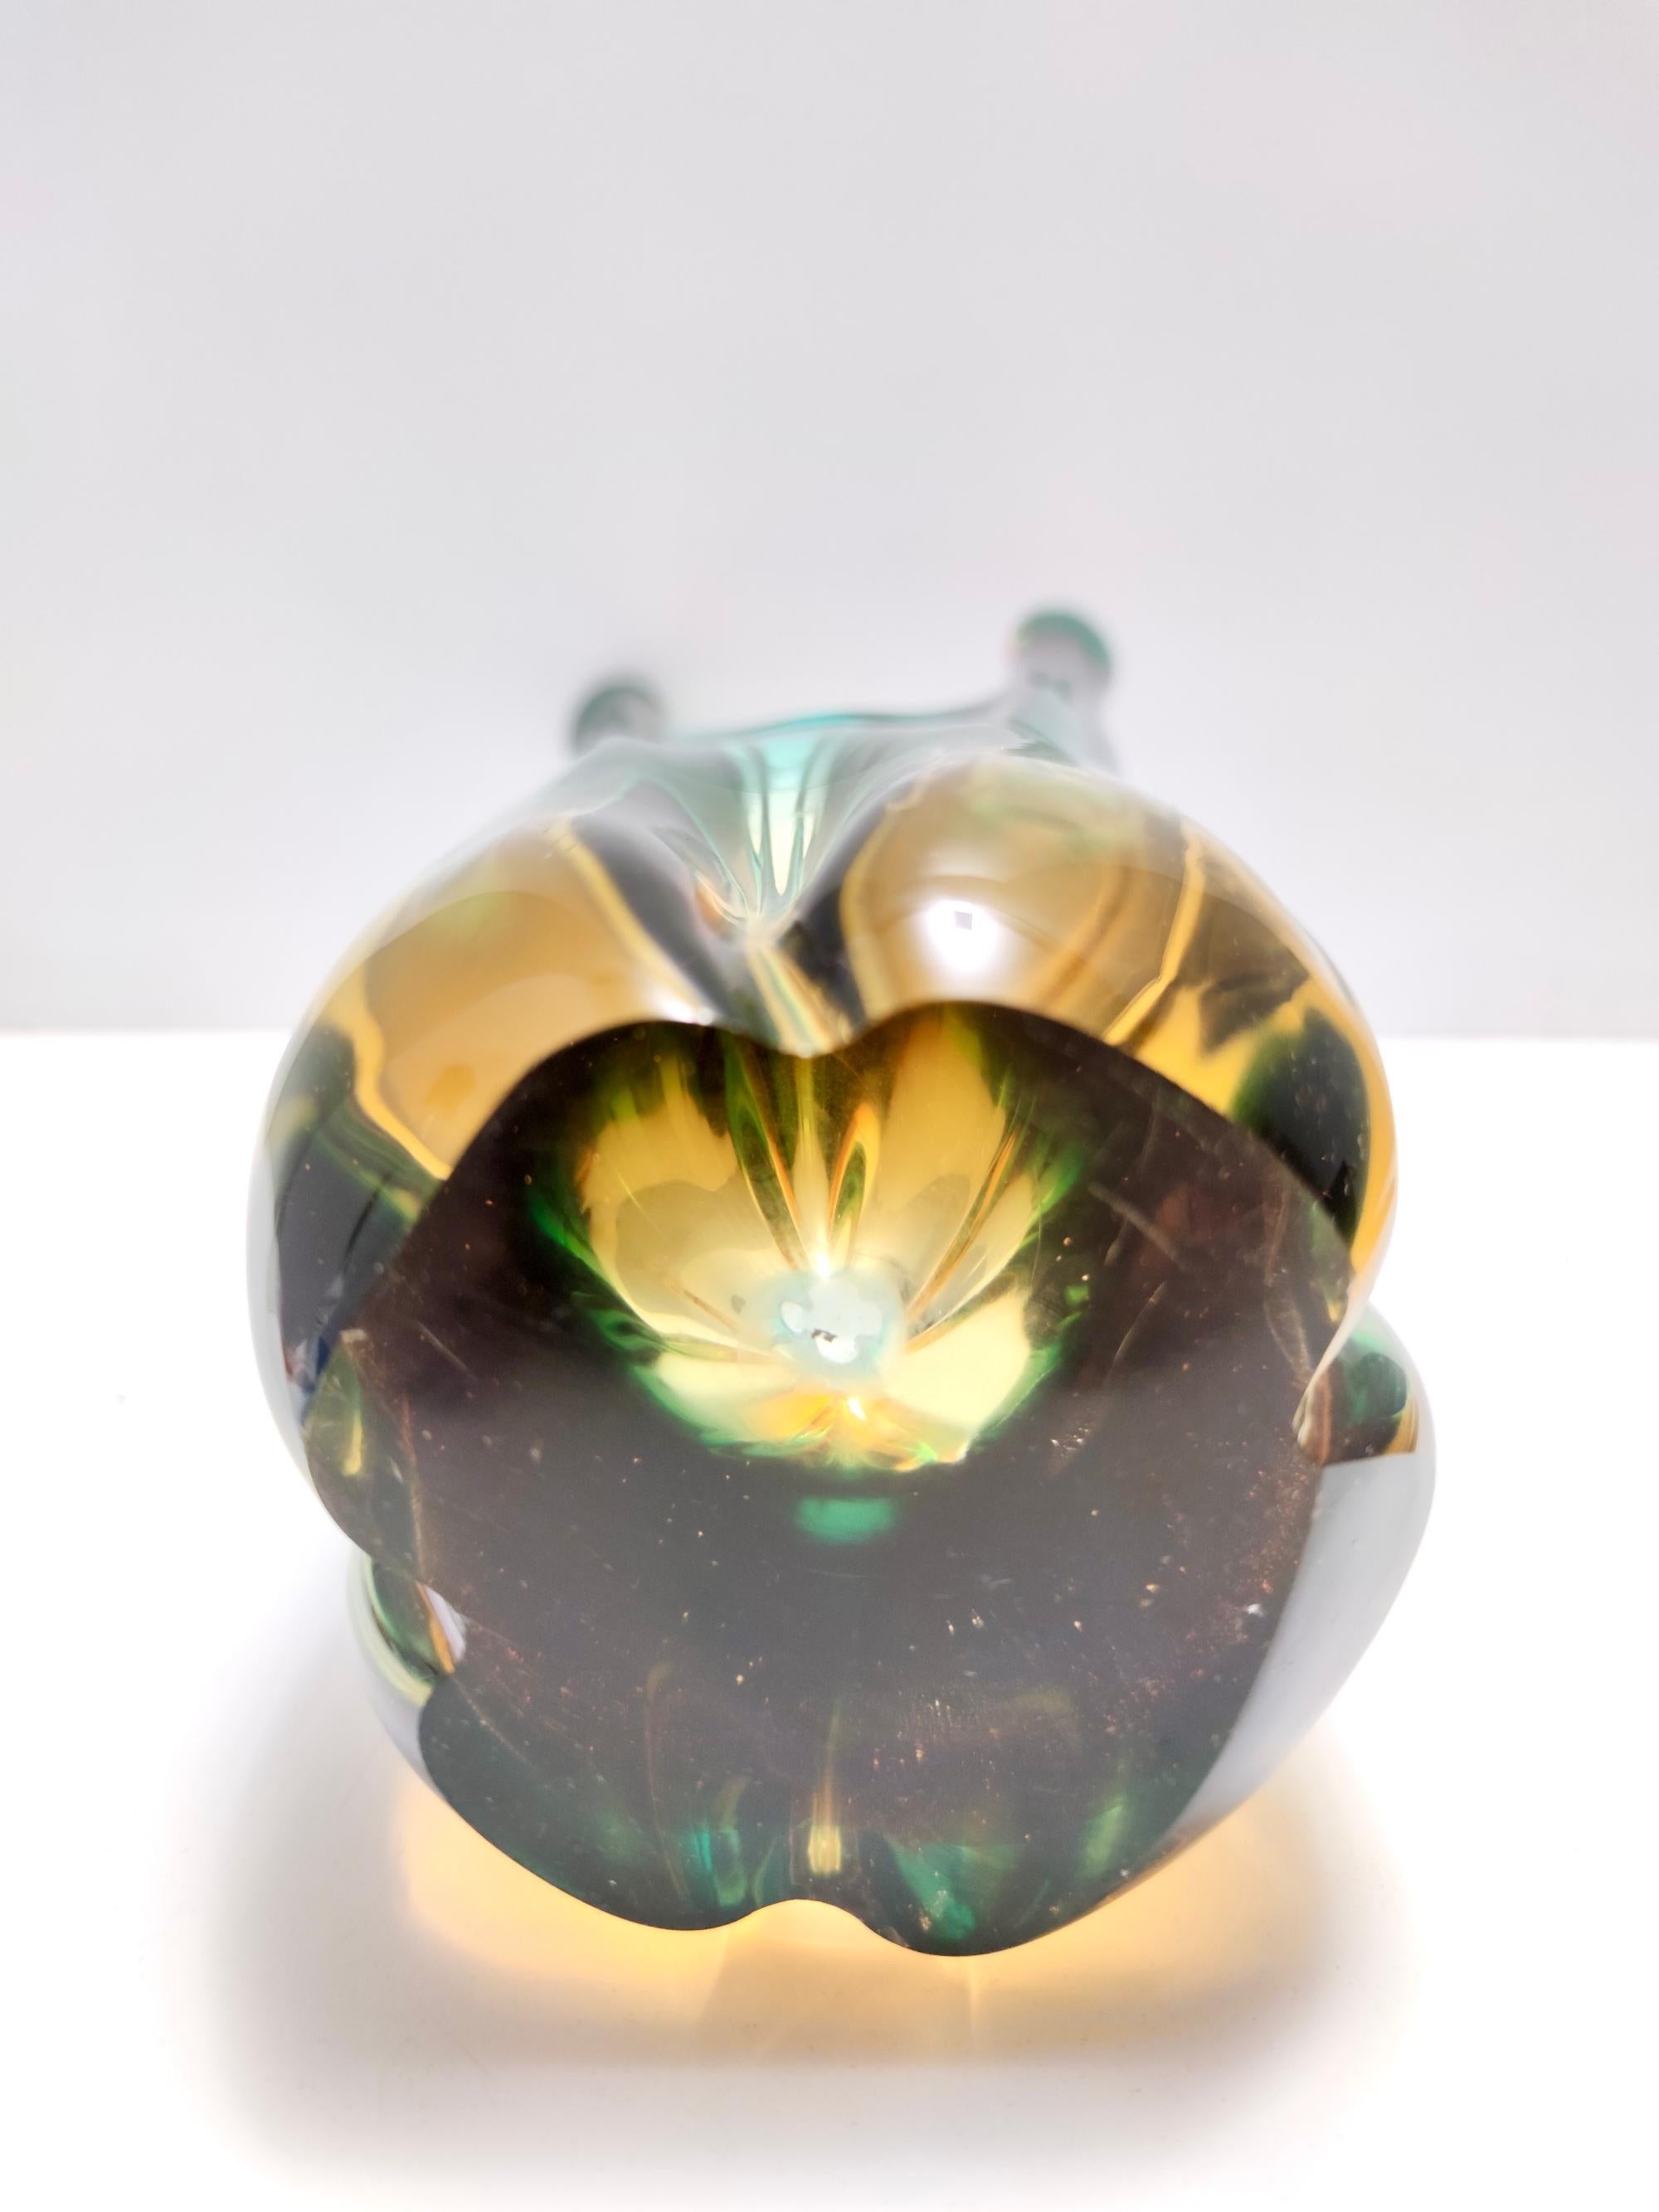 Stunning Green and Amber Murano Glass Centerpiece Vase, Italy For Sale 6